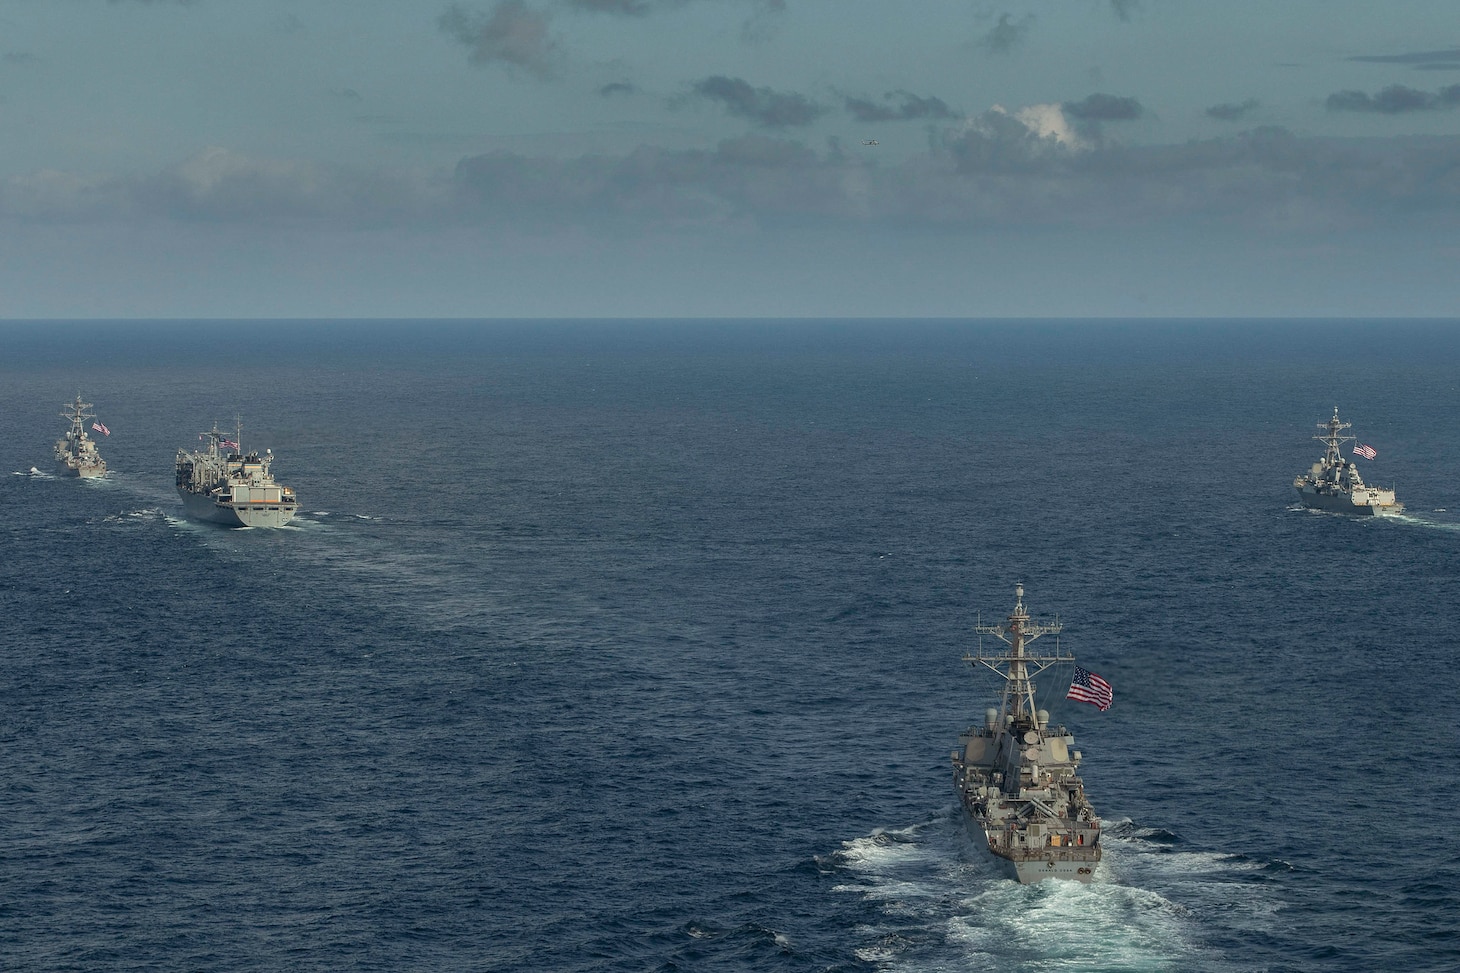 ARCTIC OCEAN (May 5, 2020) The Type-23 Duke-class frigate HMS Kent (F78), the Arleigh Burke-class guided-missile destroyer USS Roosevelt (DDG 80), the Arleigh Burke-class guided-missile destroyer USS Porter (DDG 78), the Arleigh Burke-class guided-missile destroyer USS Donald Cook (DDG 75), and USNS Supply (T-AOE-6) conduct a photo exercise (PHOTOEX) while conducting joint operations to ensure maritime security in the Arctic Ocean, May 5, 2020.